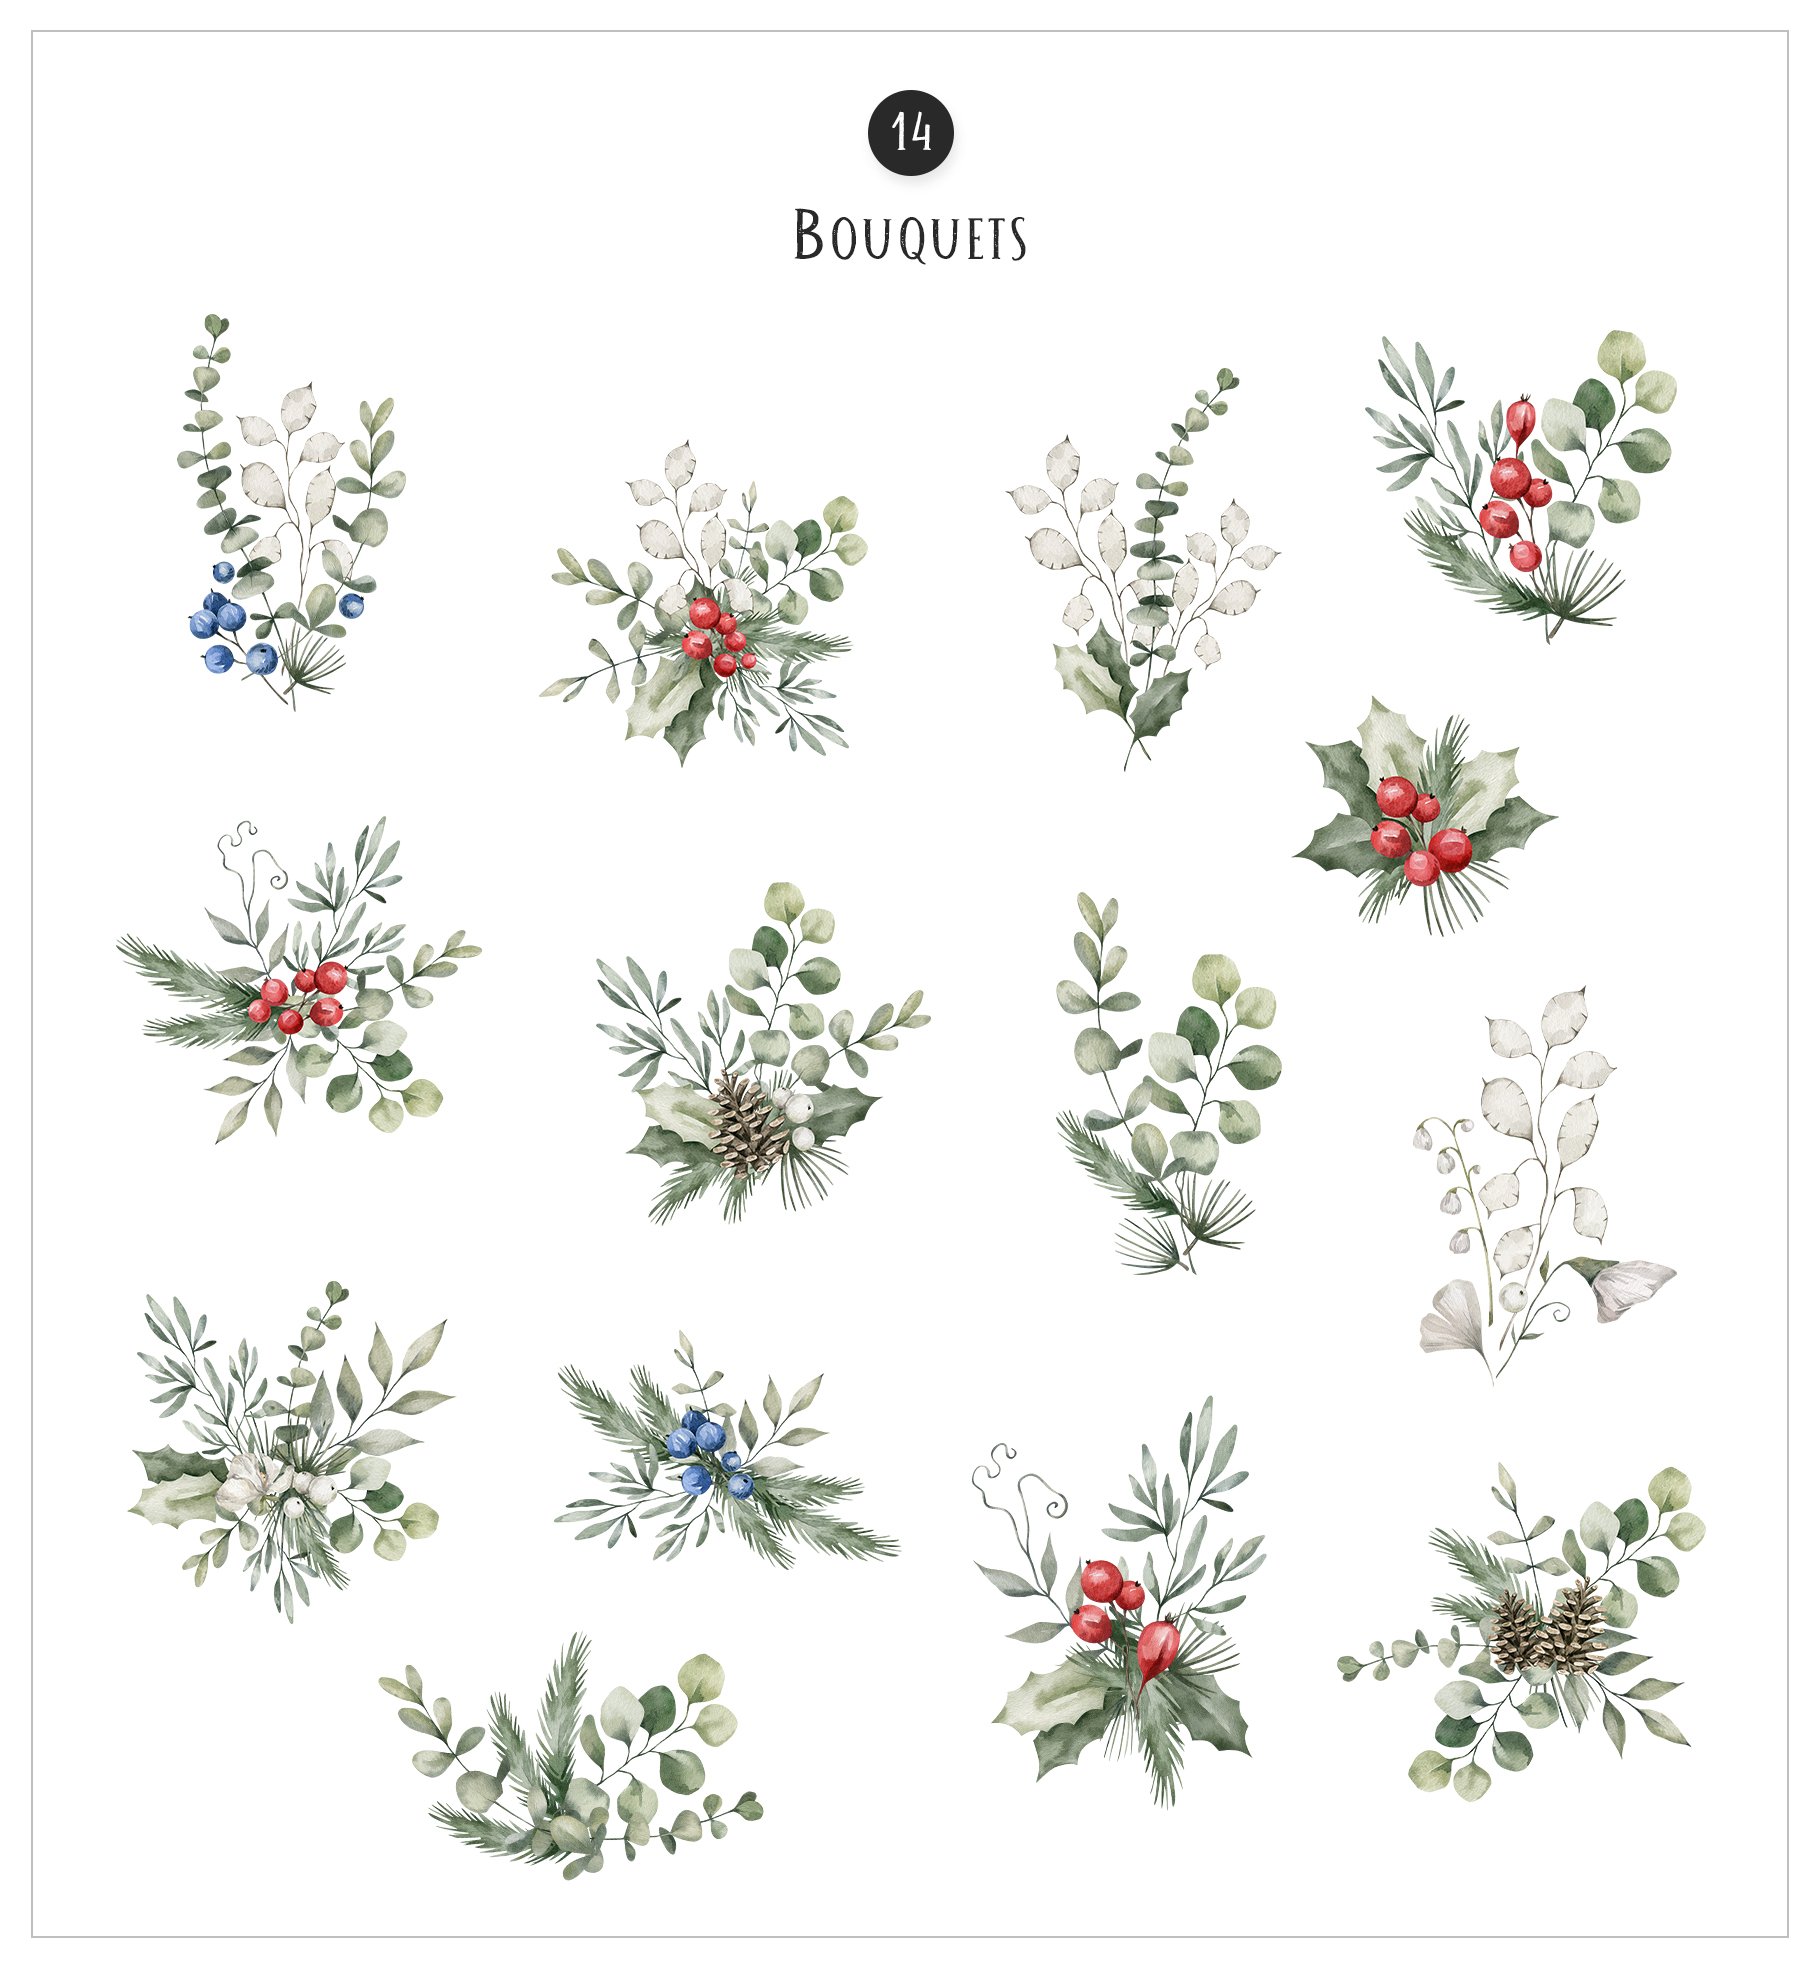 There are 14 bouquets graphics.